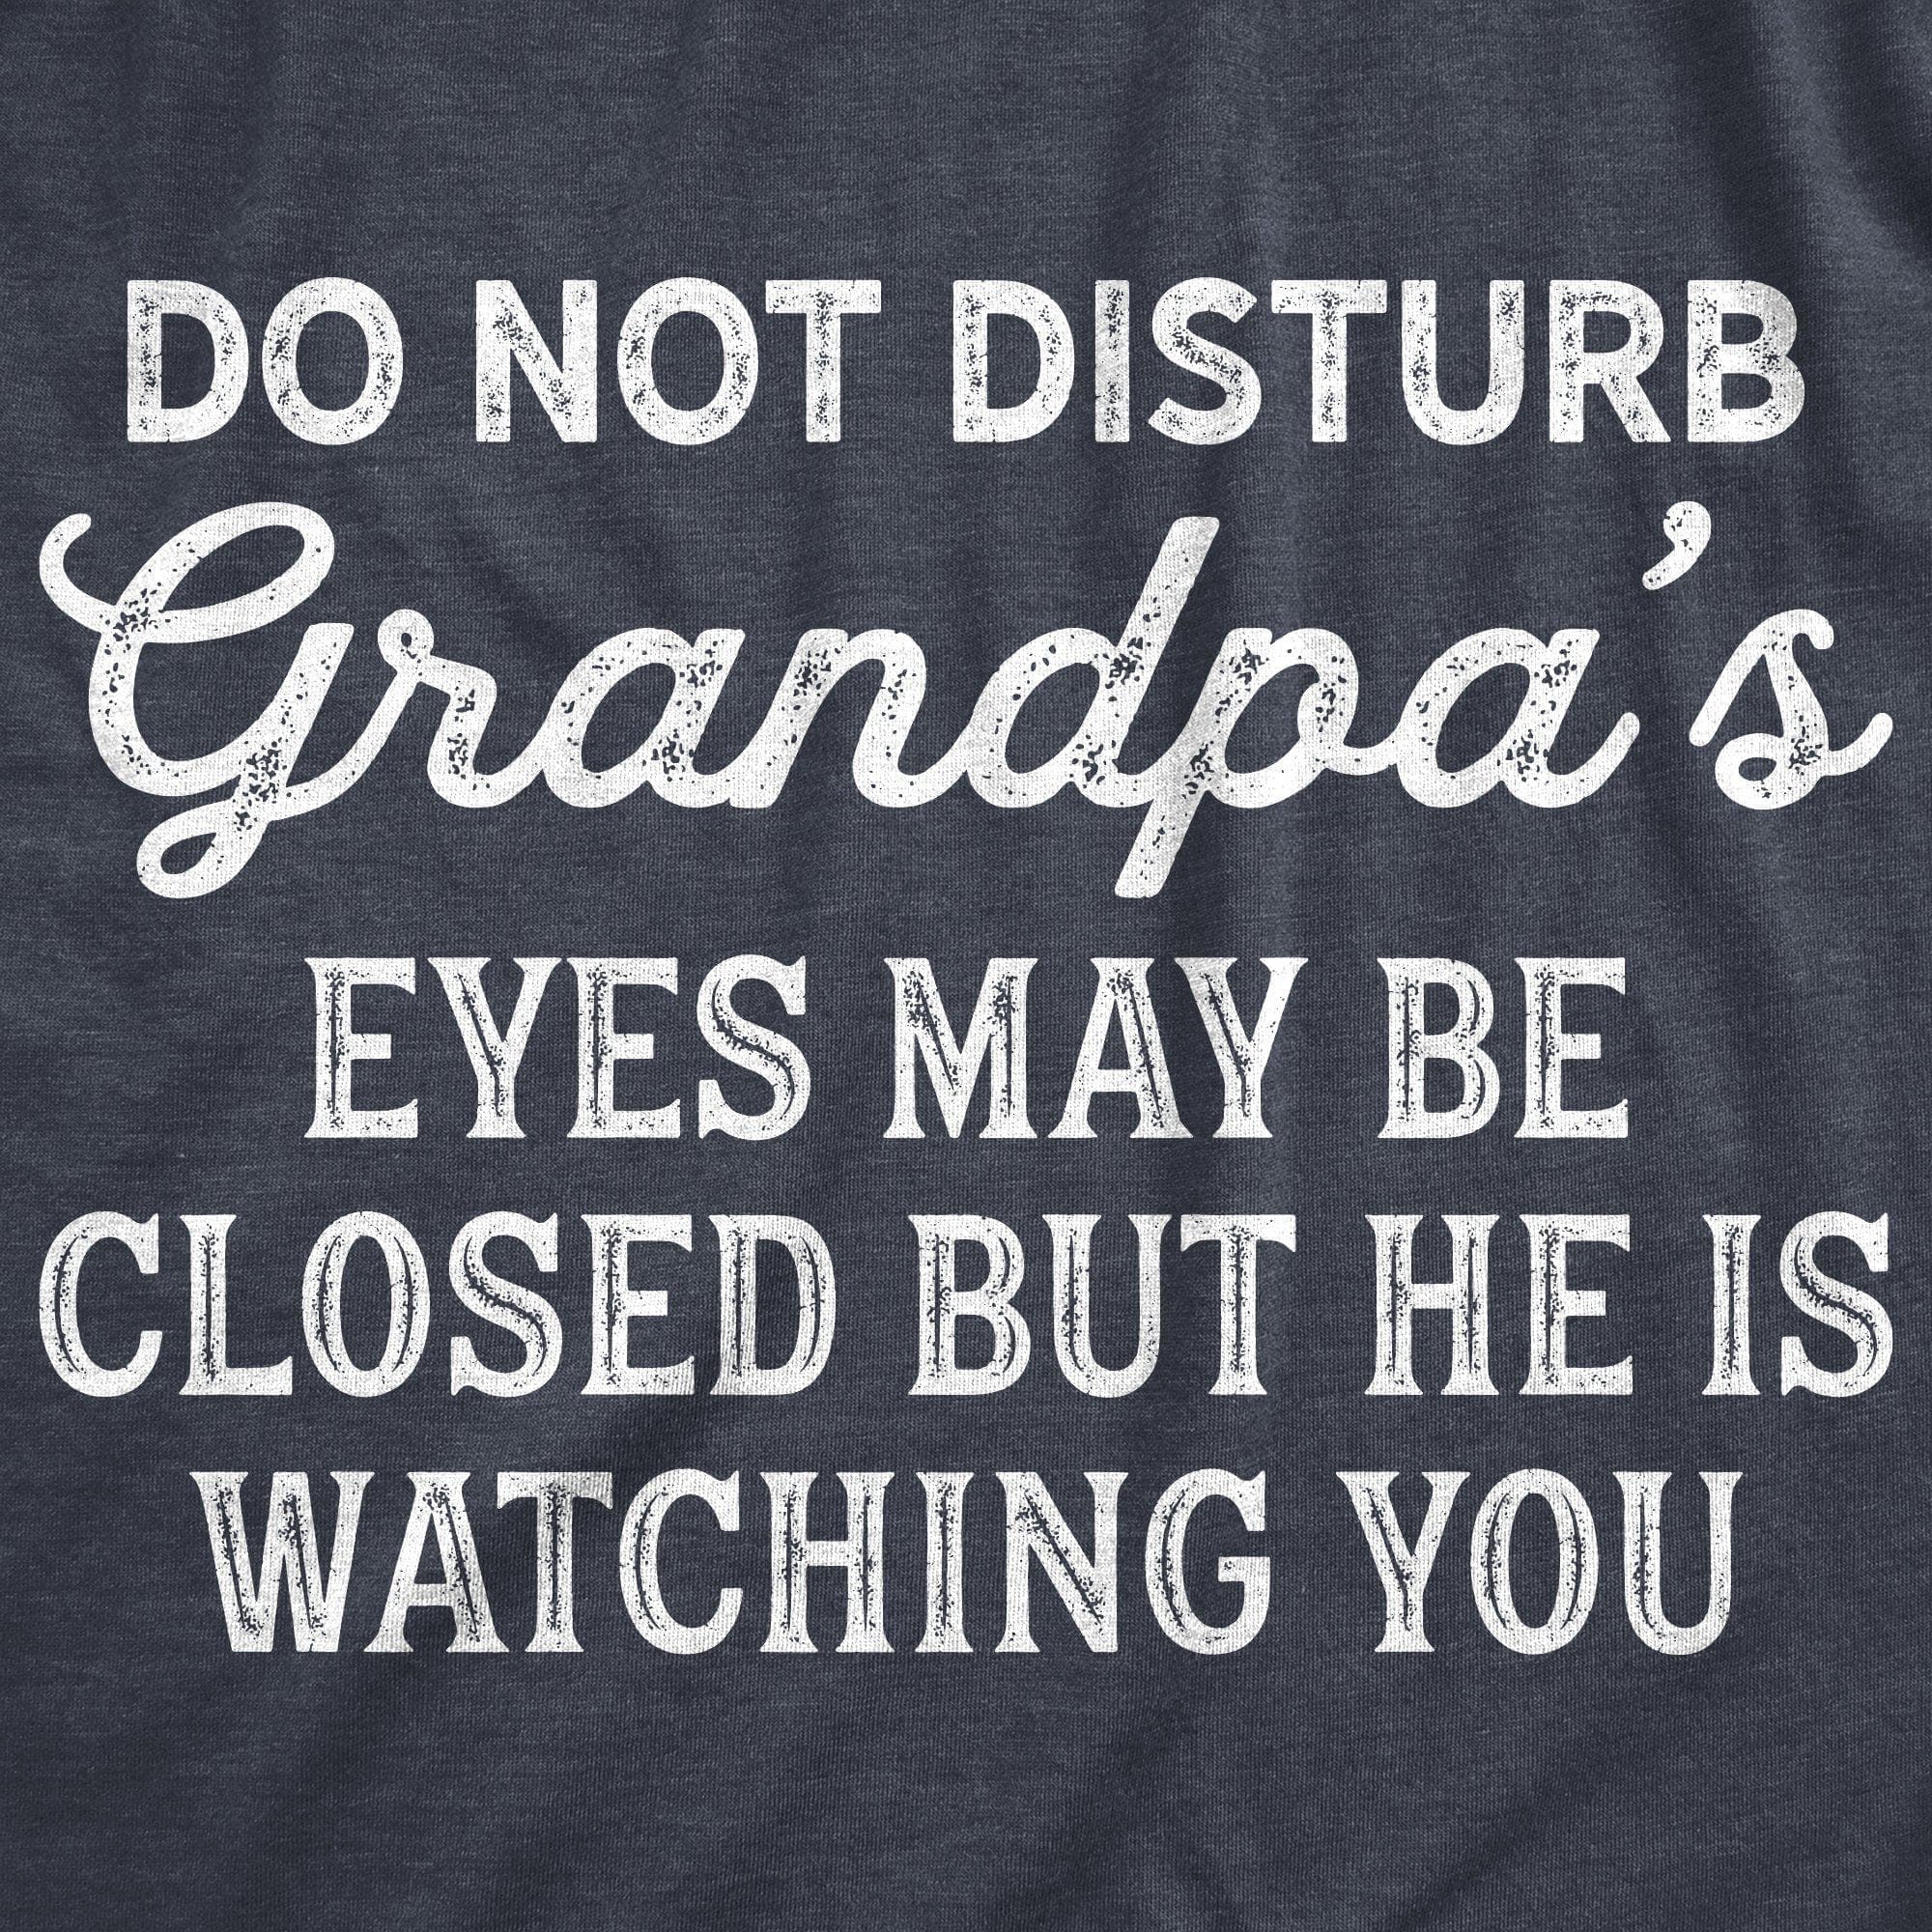 Do Not Disturb Grandpa's Eyes May Be Closed But He Is Watching You Men's Tshirt - Crazy Dog T-Shirts